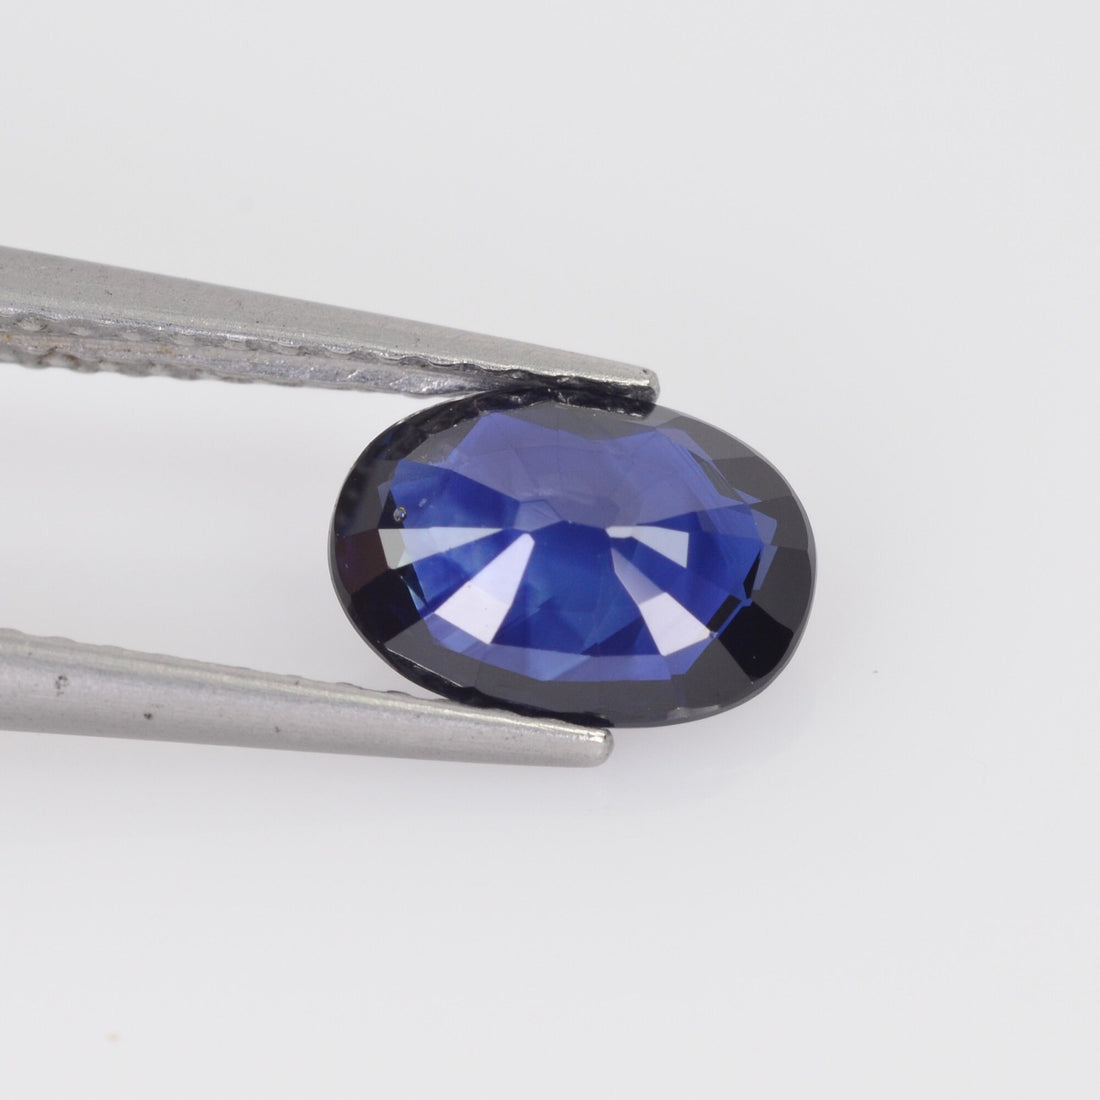 1.21 cts Natural Blue Sapphire Loose Gemstone Oval Cut